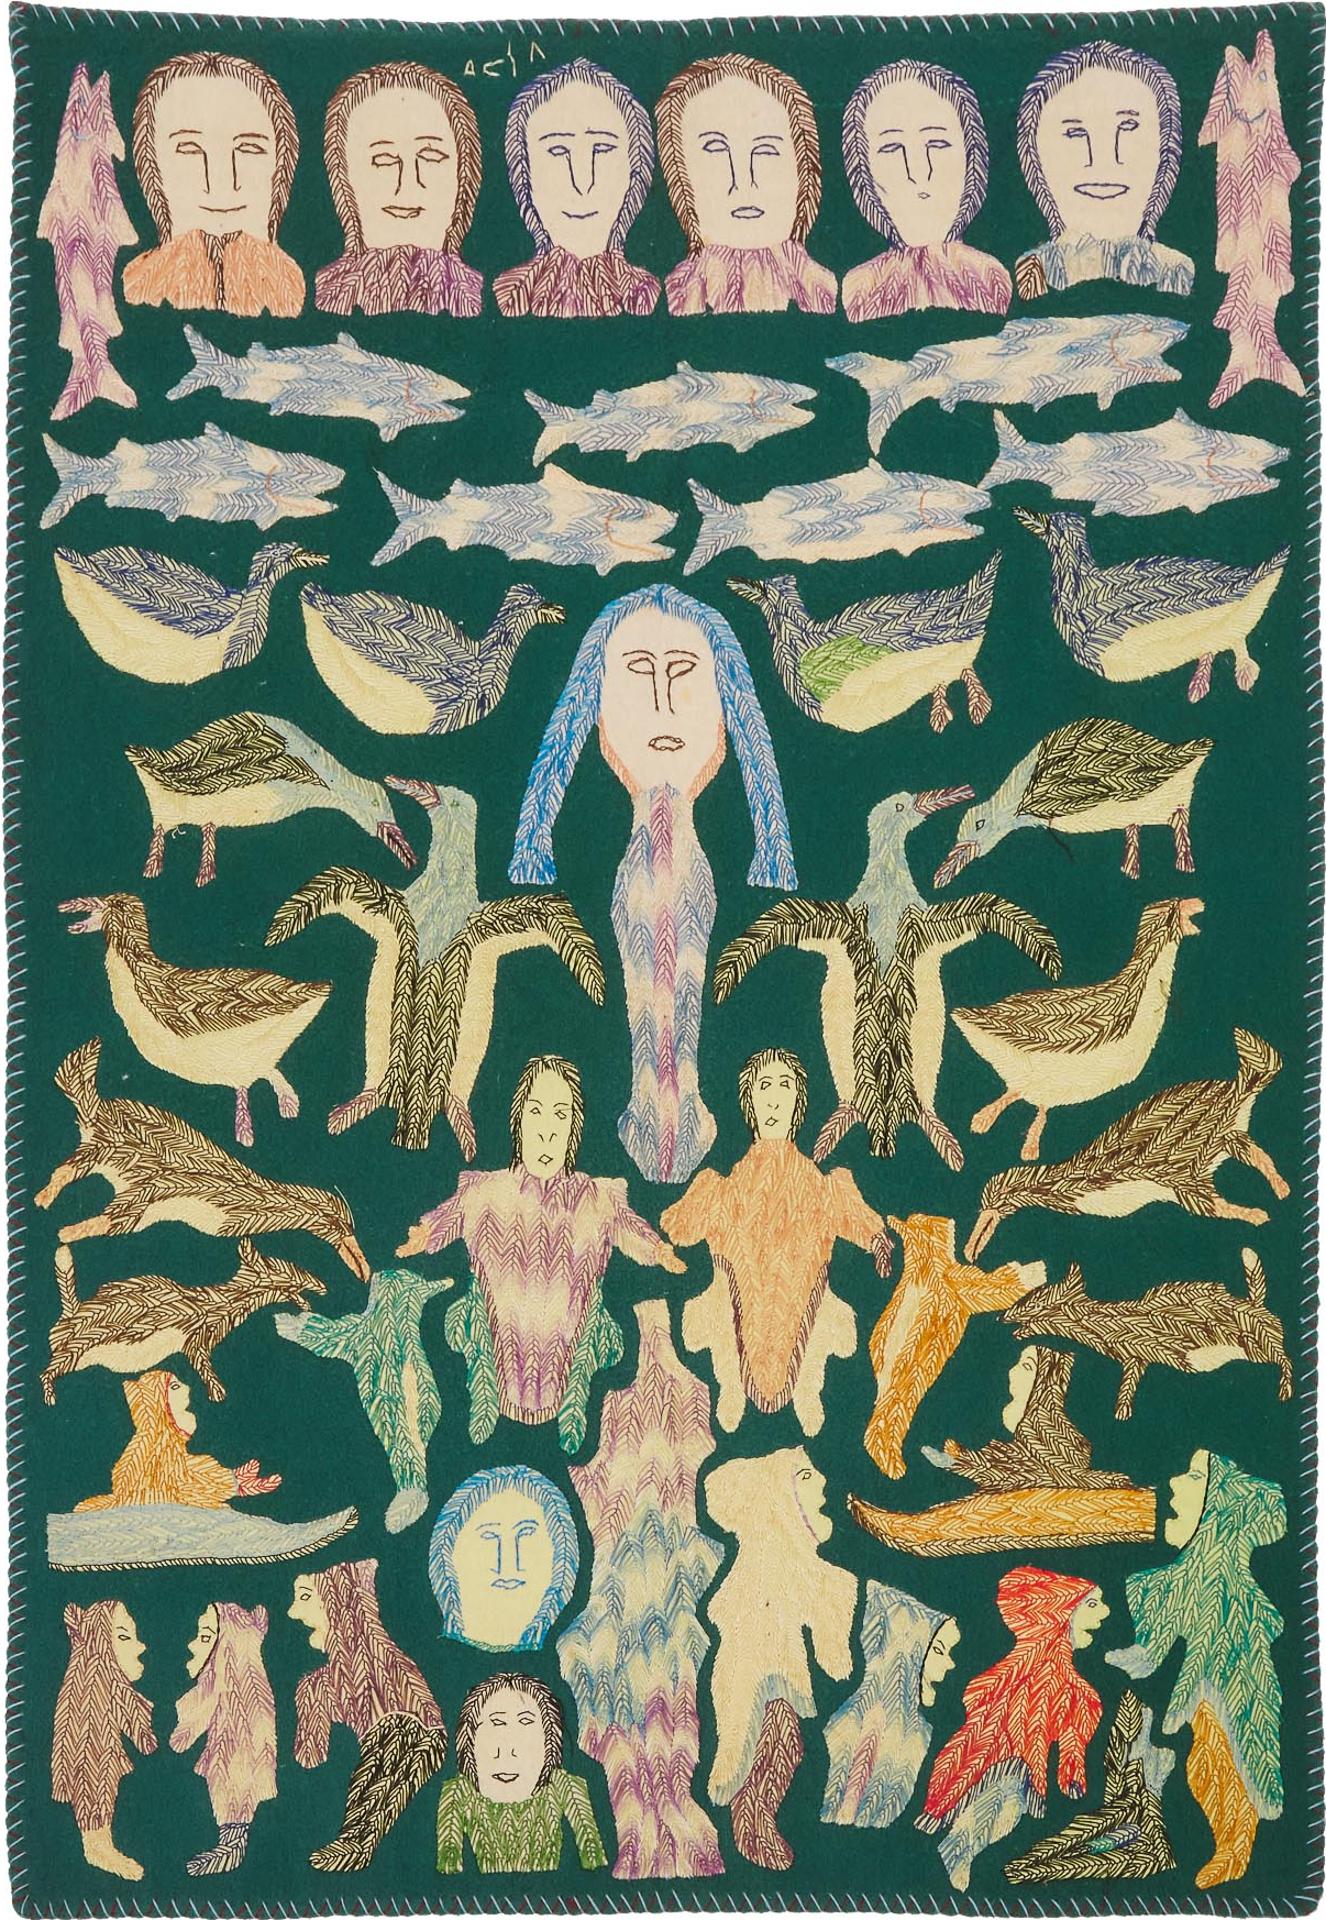 Elizabeth Angrnaqquaq (1916-2003) - Composition With Figures, Fish, And Fowl, Ca. 1985